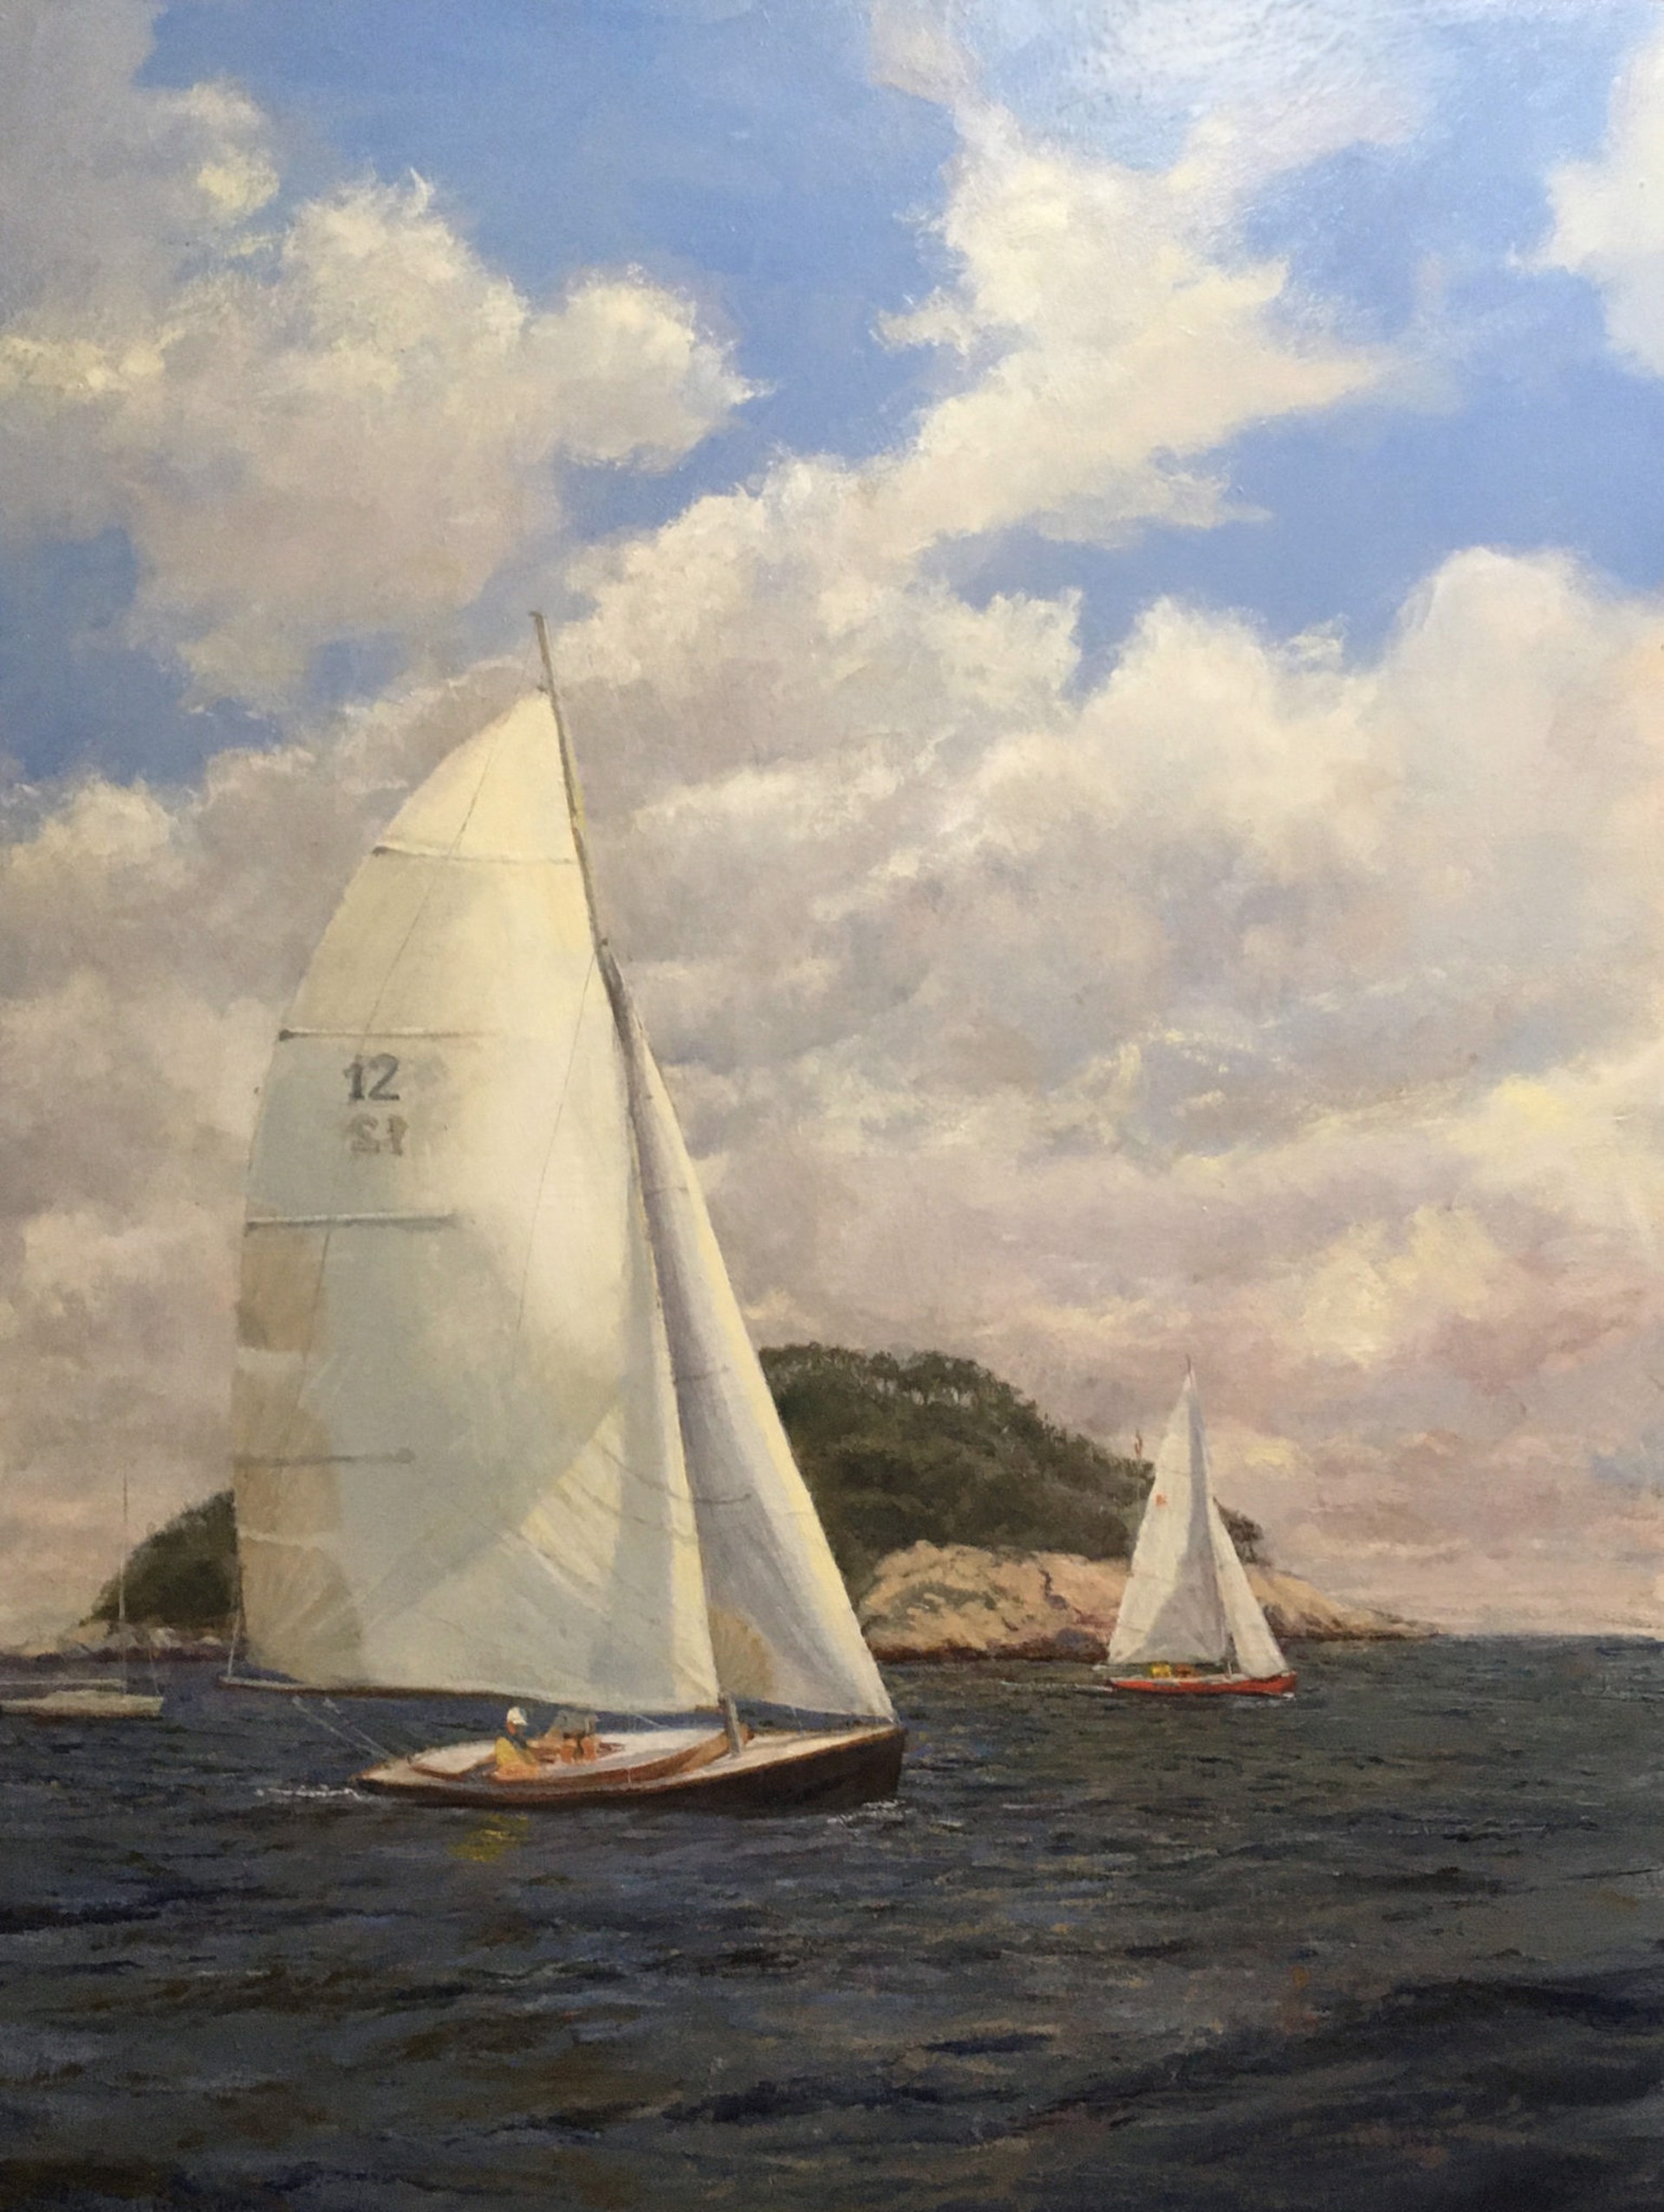 Sunday Sail by James Magner